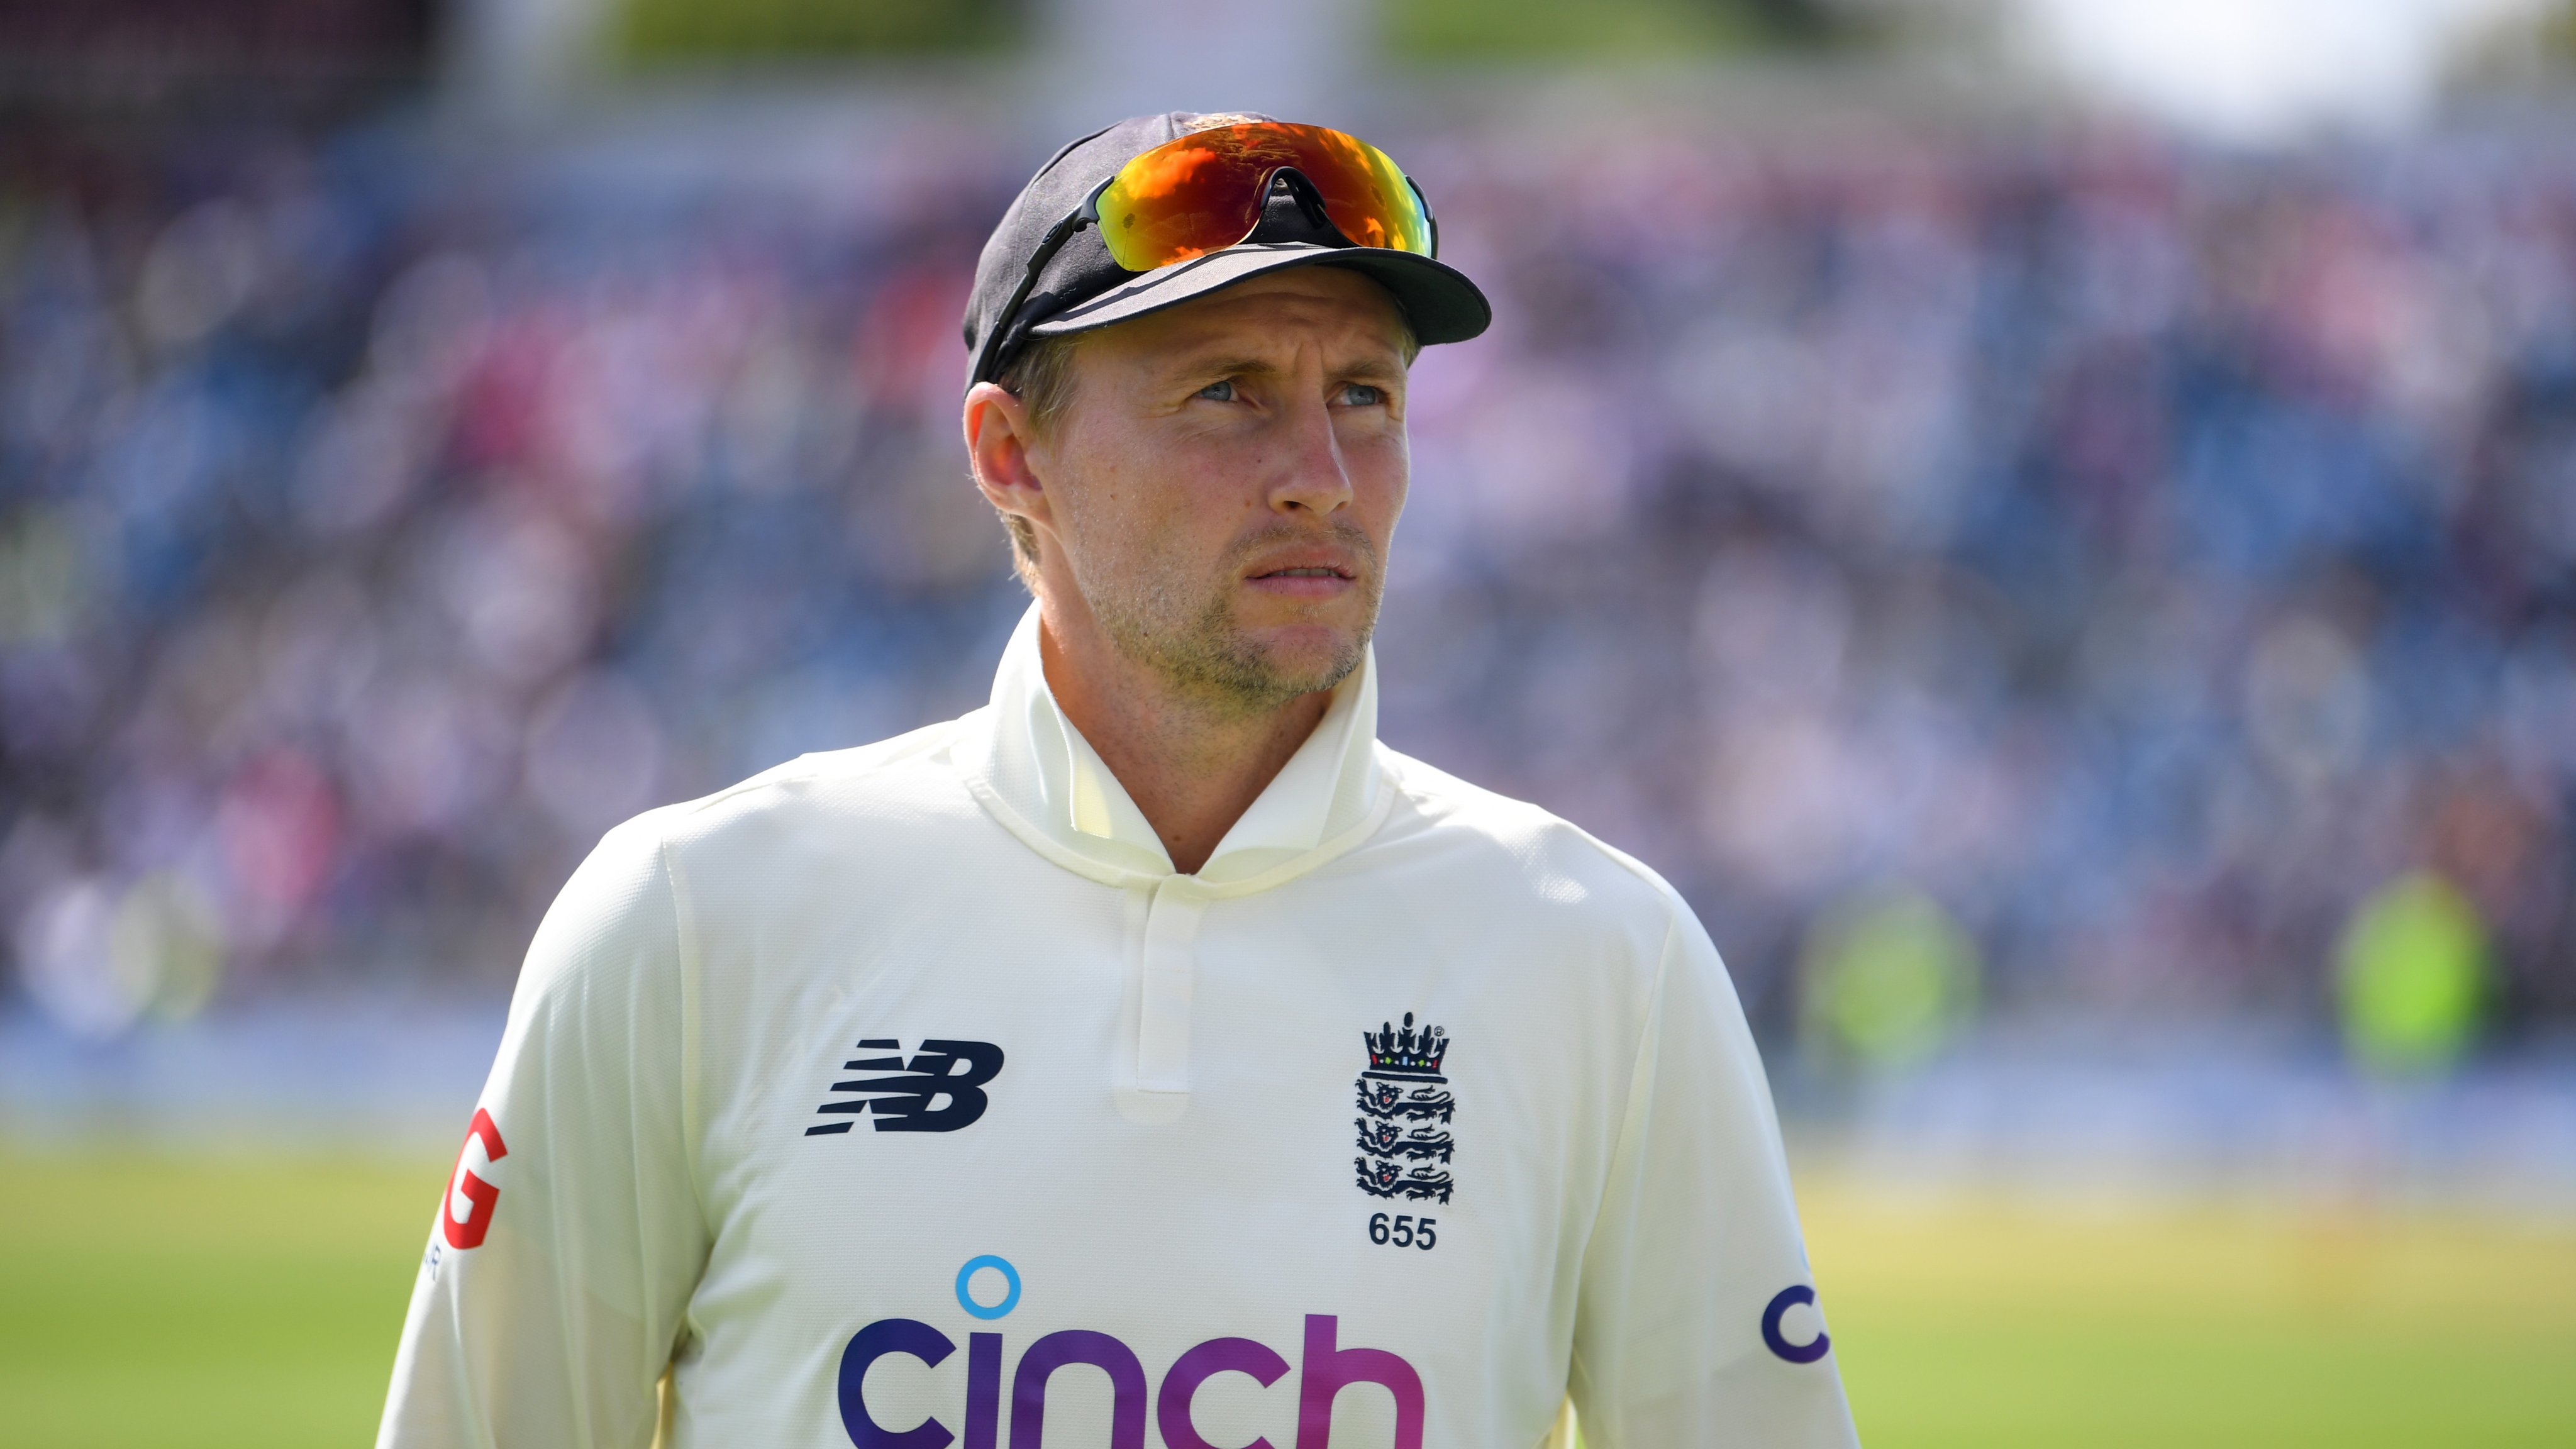 These events have fractured our game and torn lives apart, states Joe Root on Yorkshire racism scandal